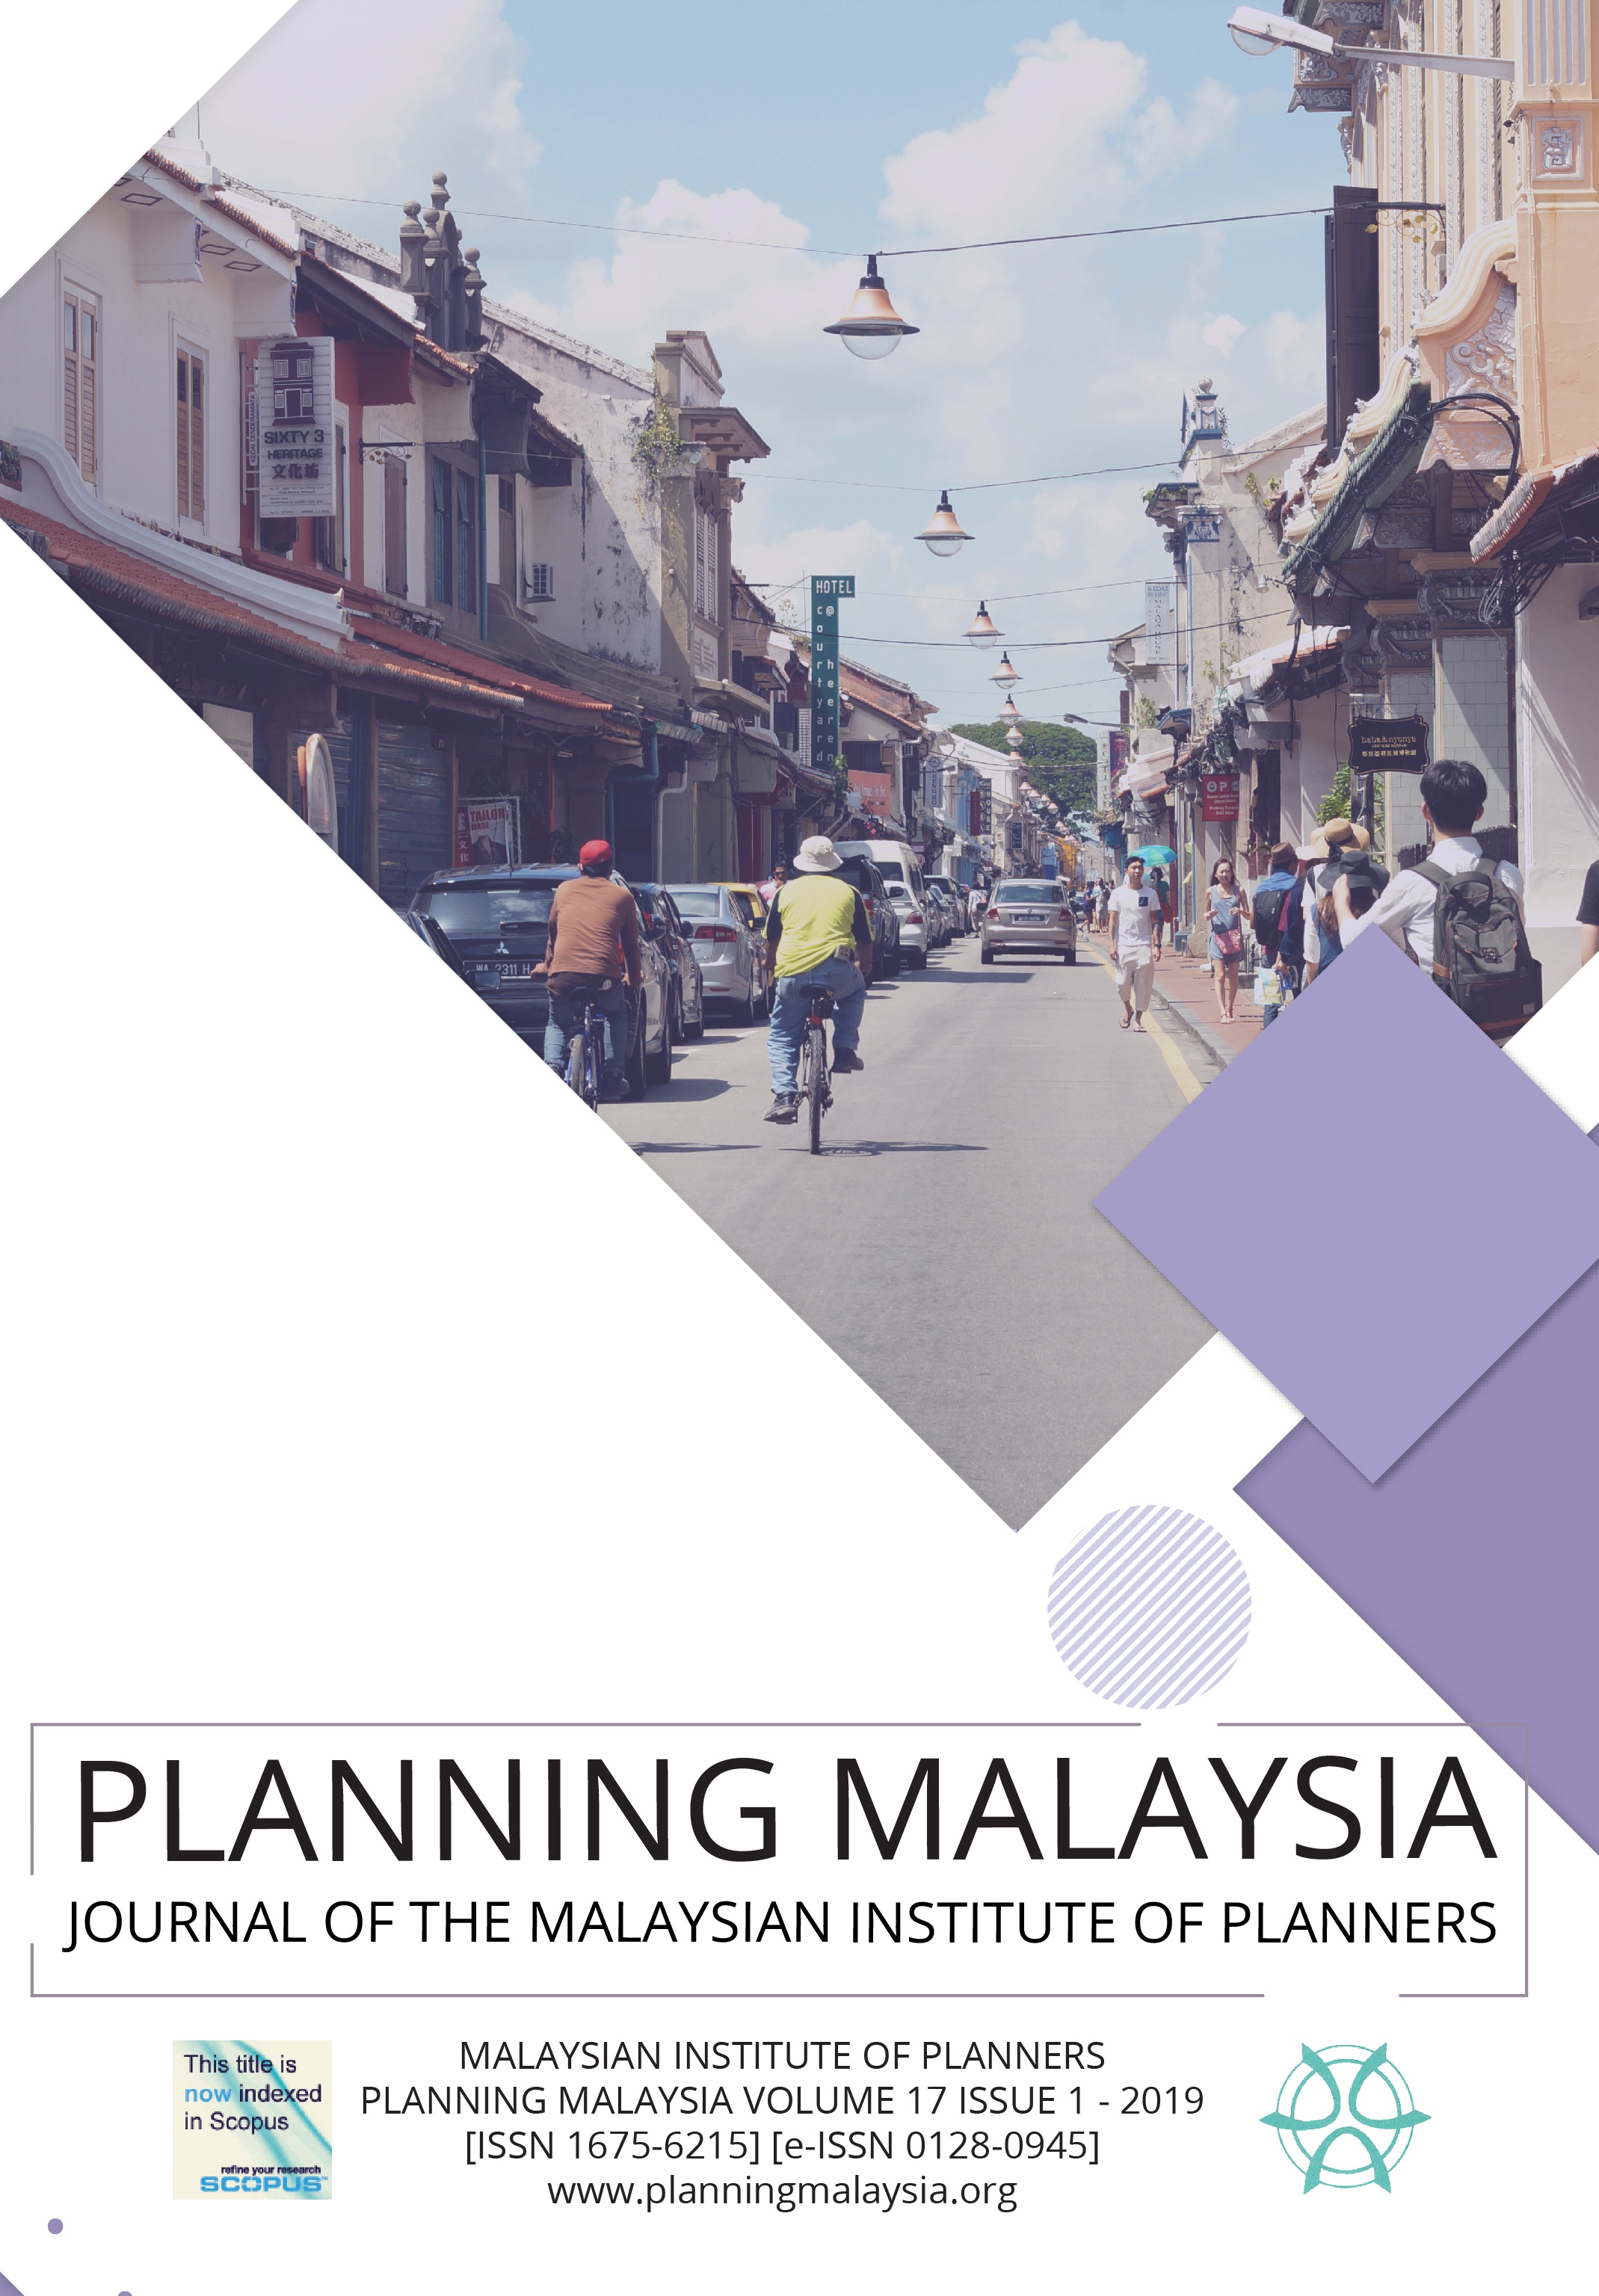 					View Vol. 17 (2019): PLANNING MALAYSIA JOURNAL : Volume 17, Issue 2, 2019
				